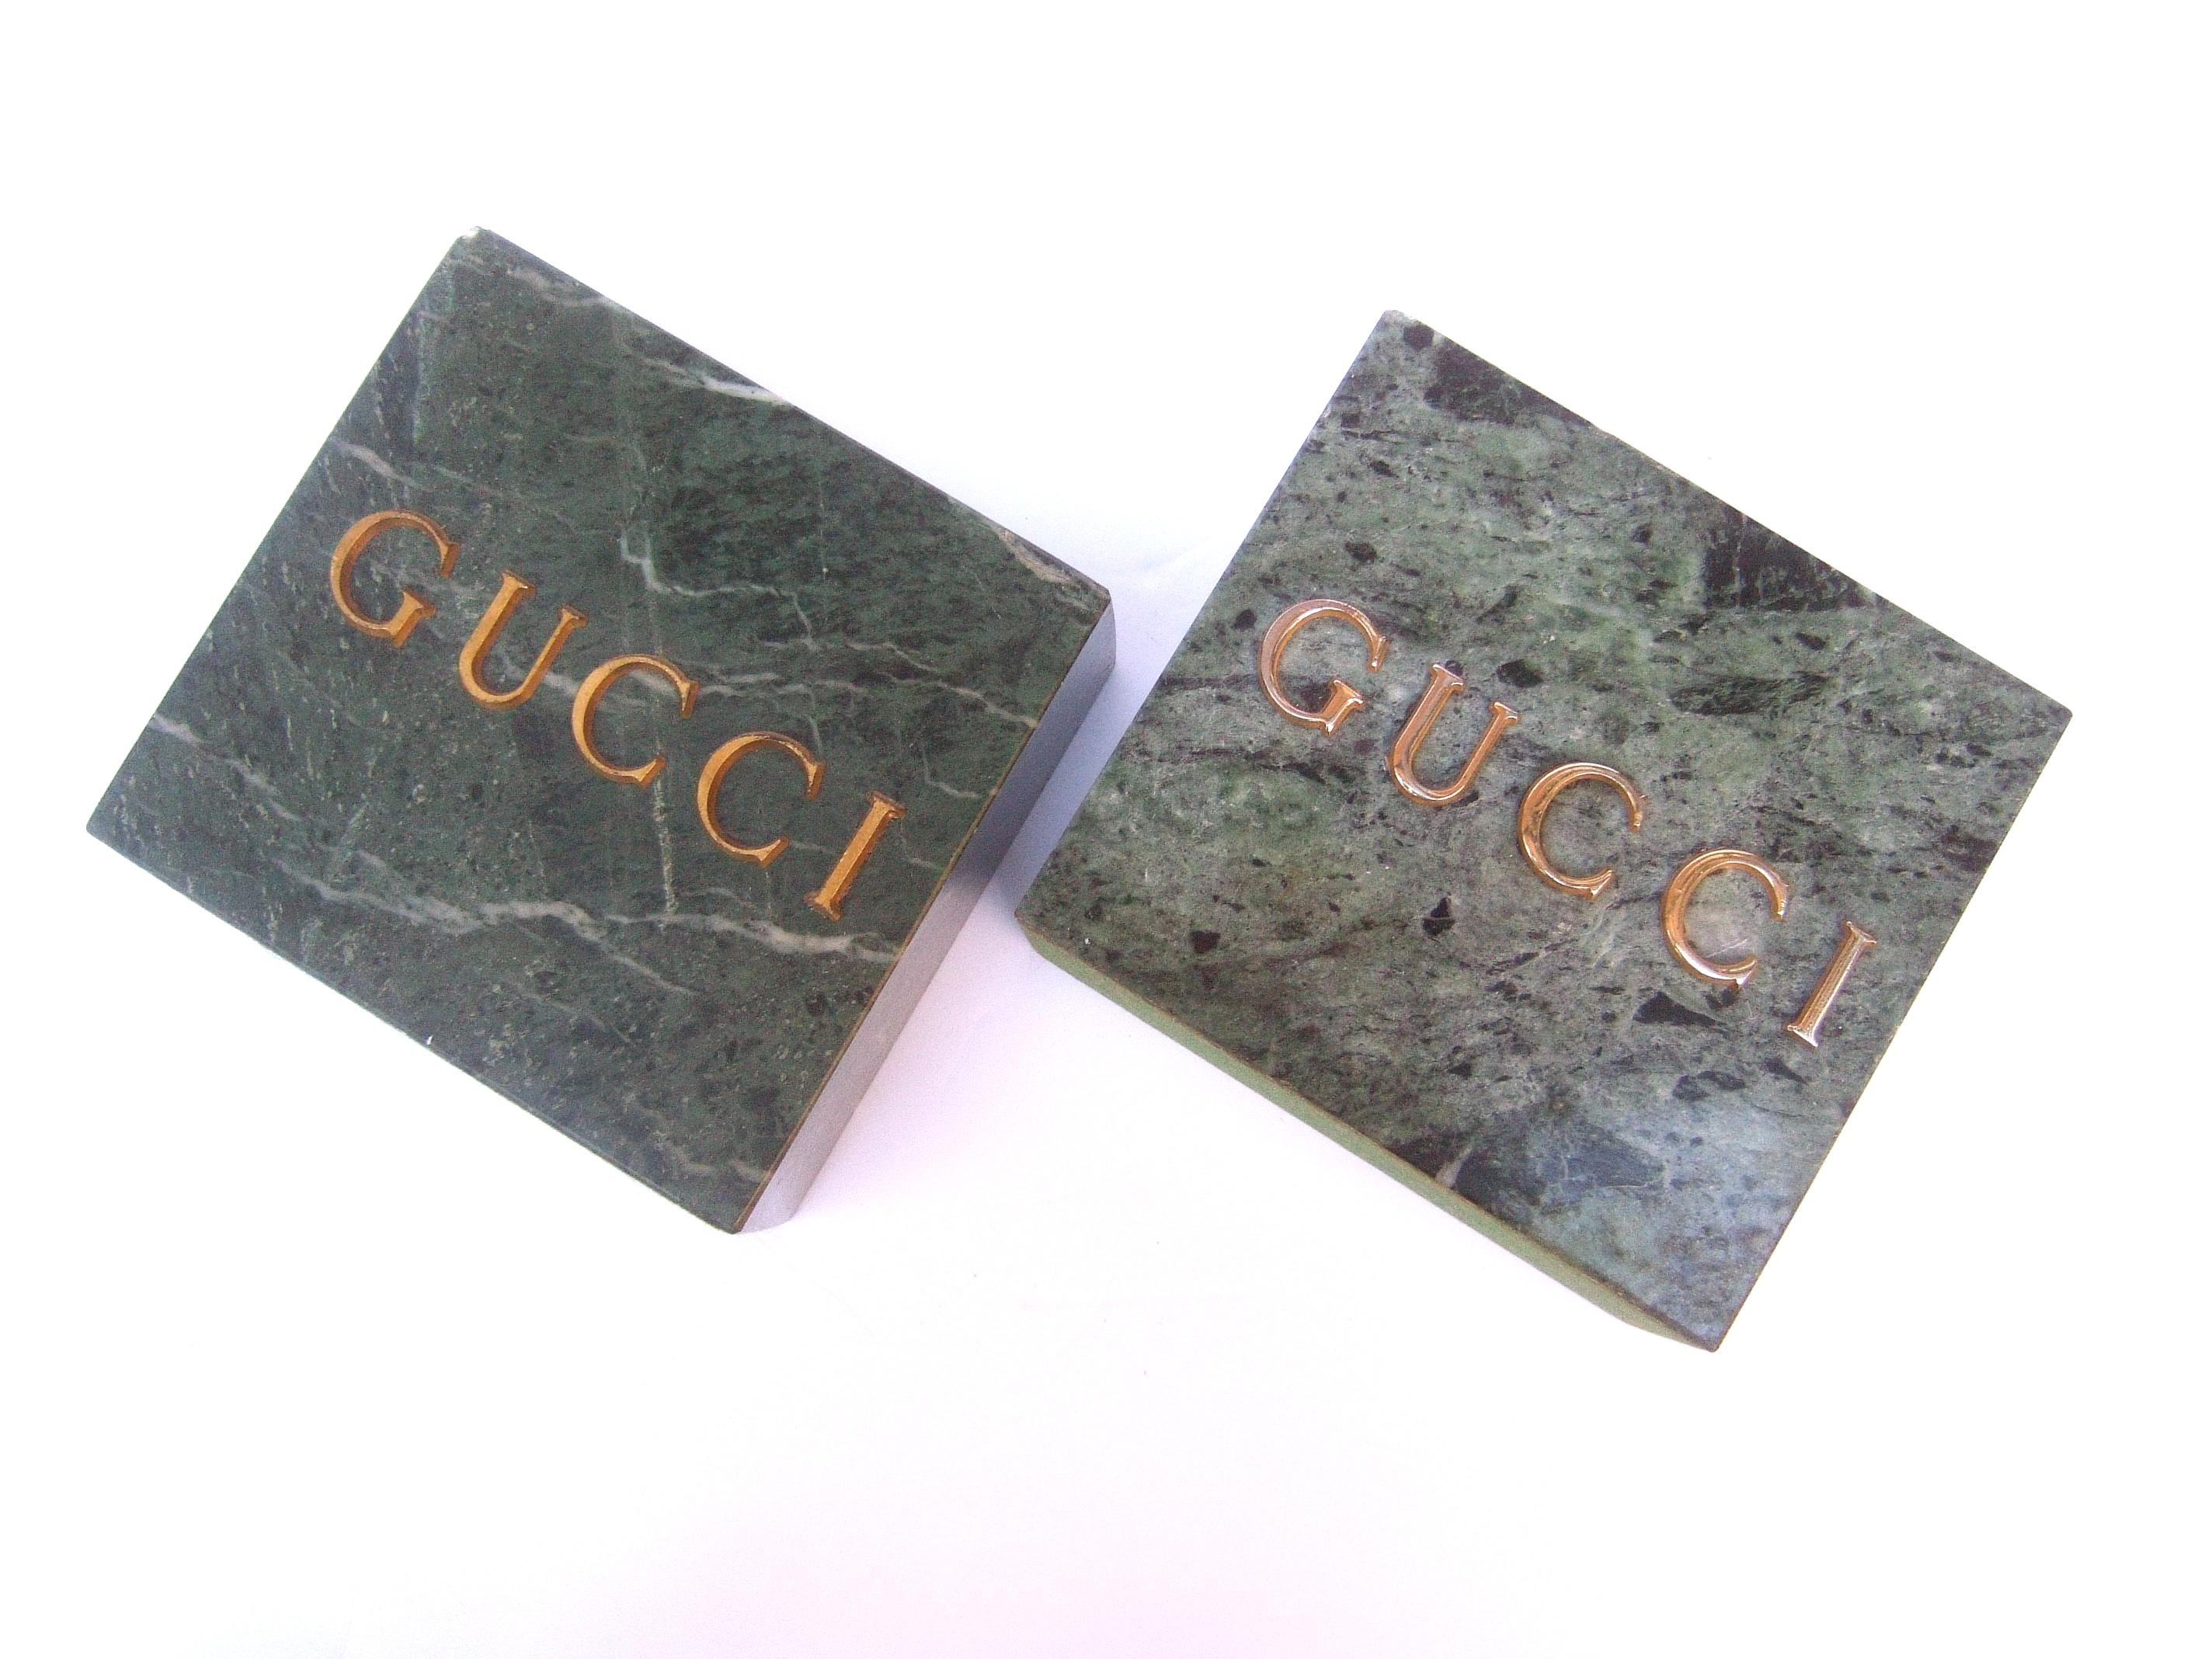 Gucci Pair of Green Marble Stone Bookends / Decorative Objects c 1970s 3